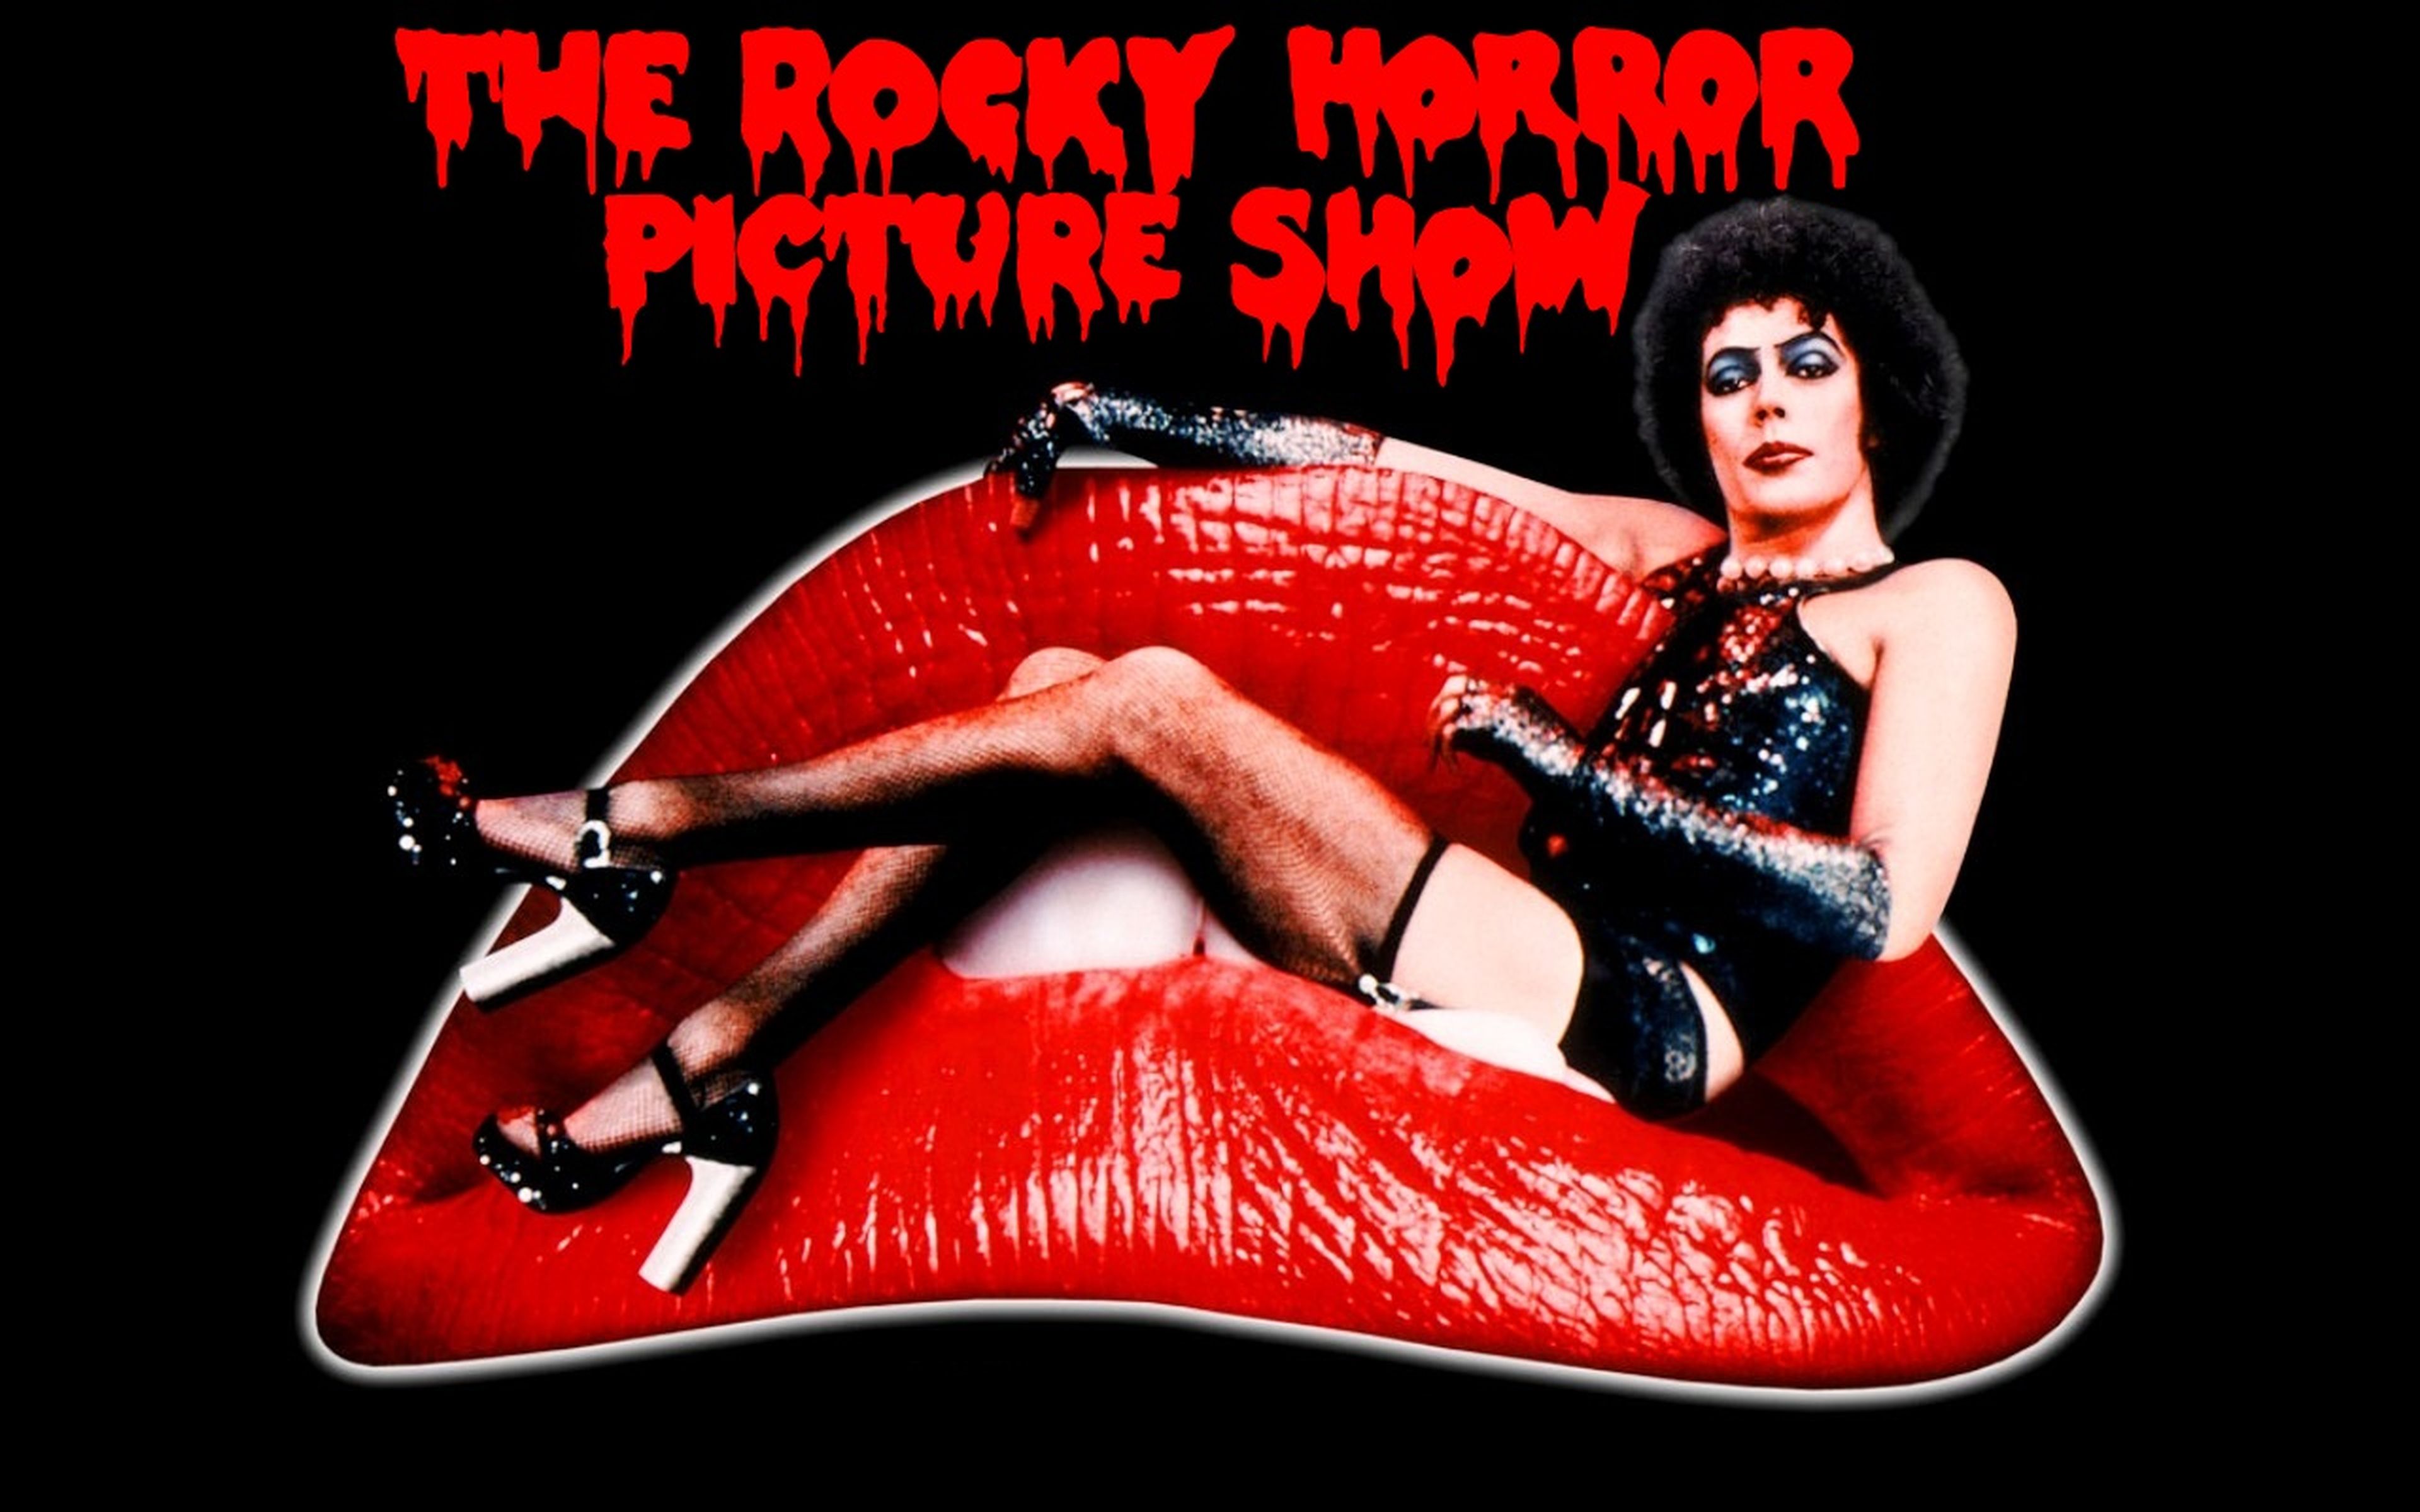 12. The Rocky Horror Picture Show (1975)